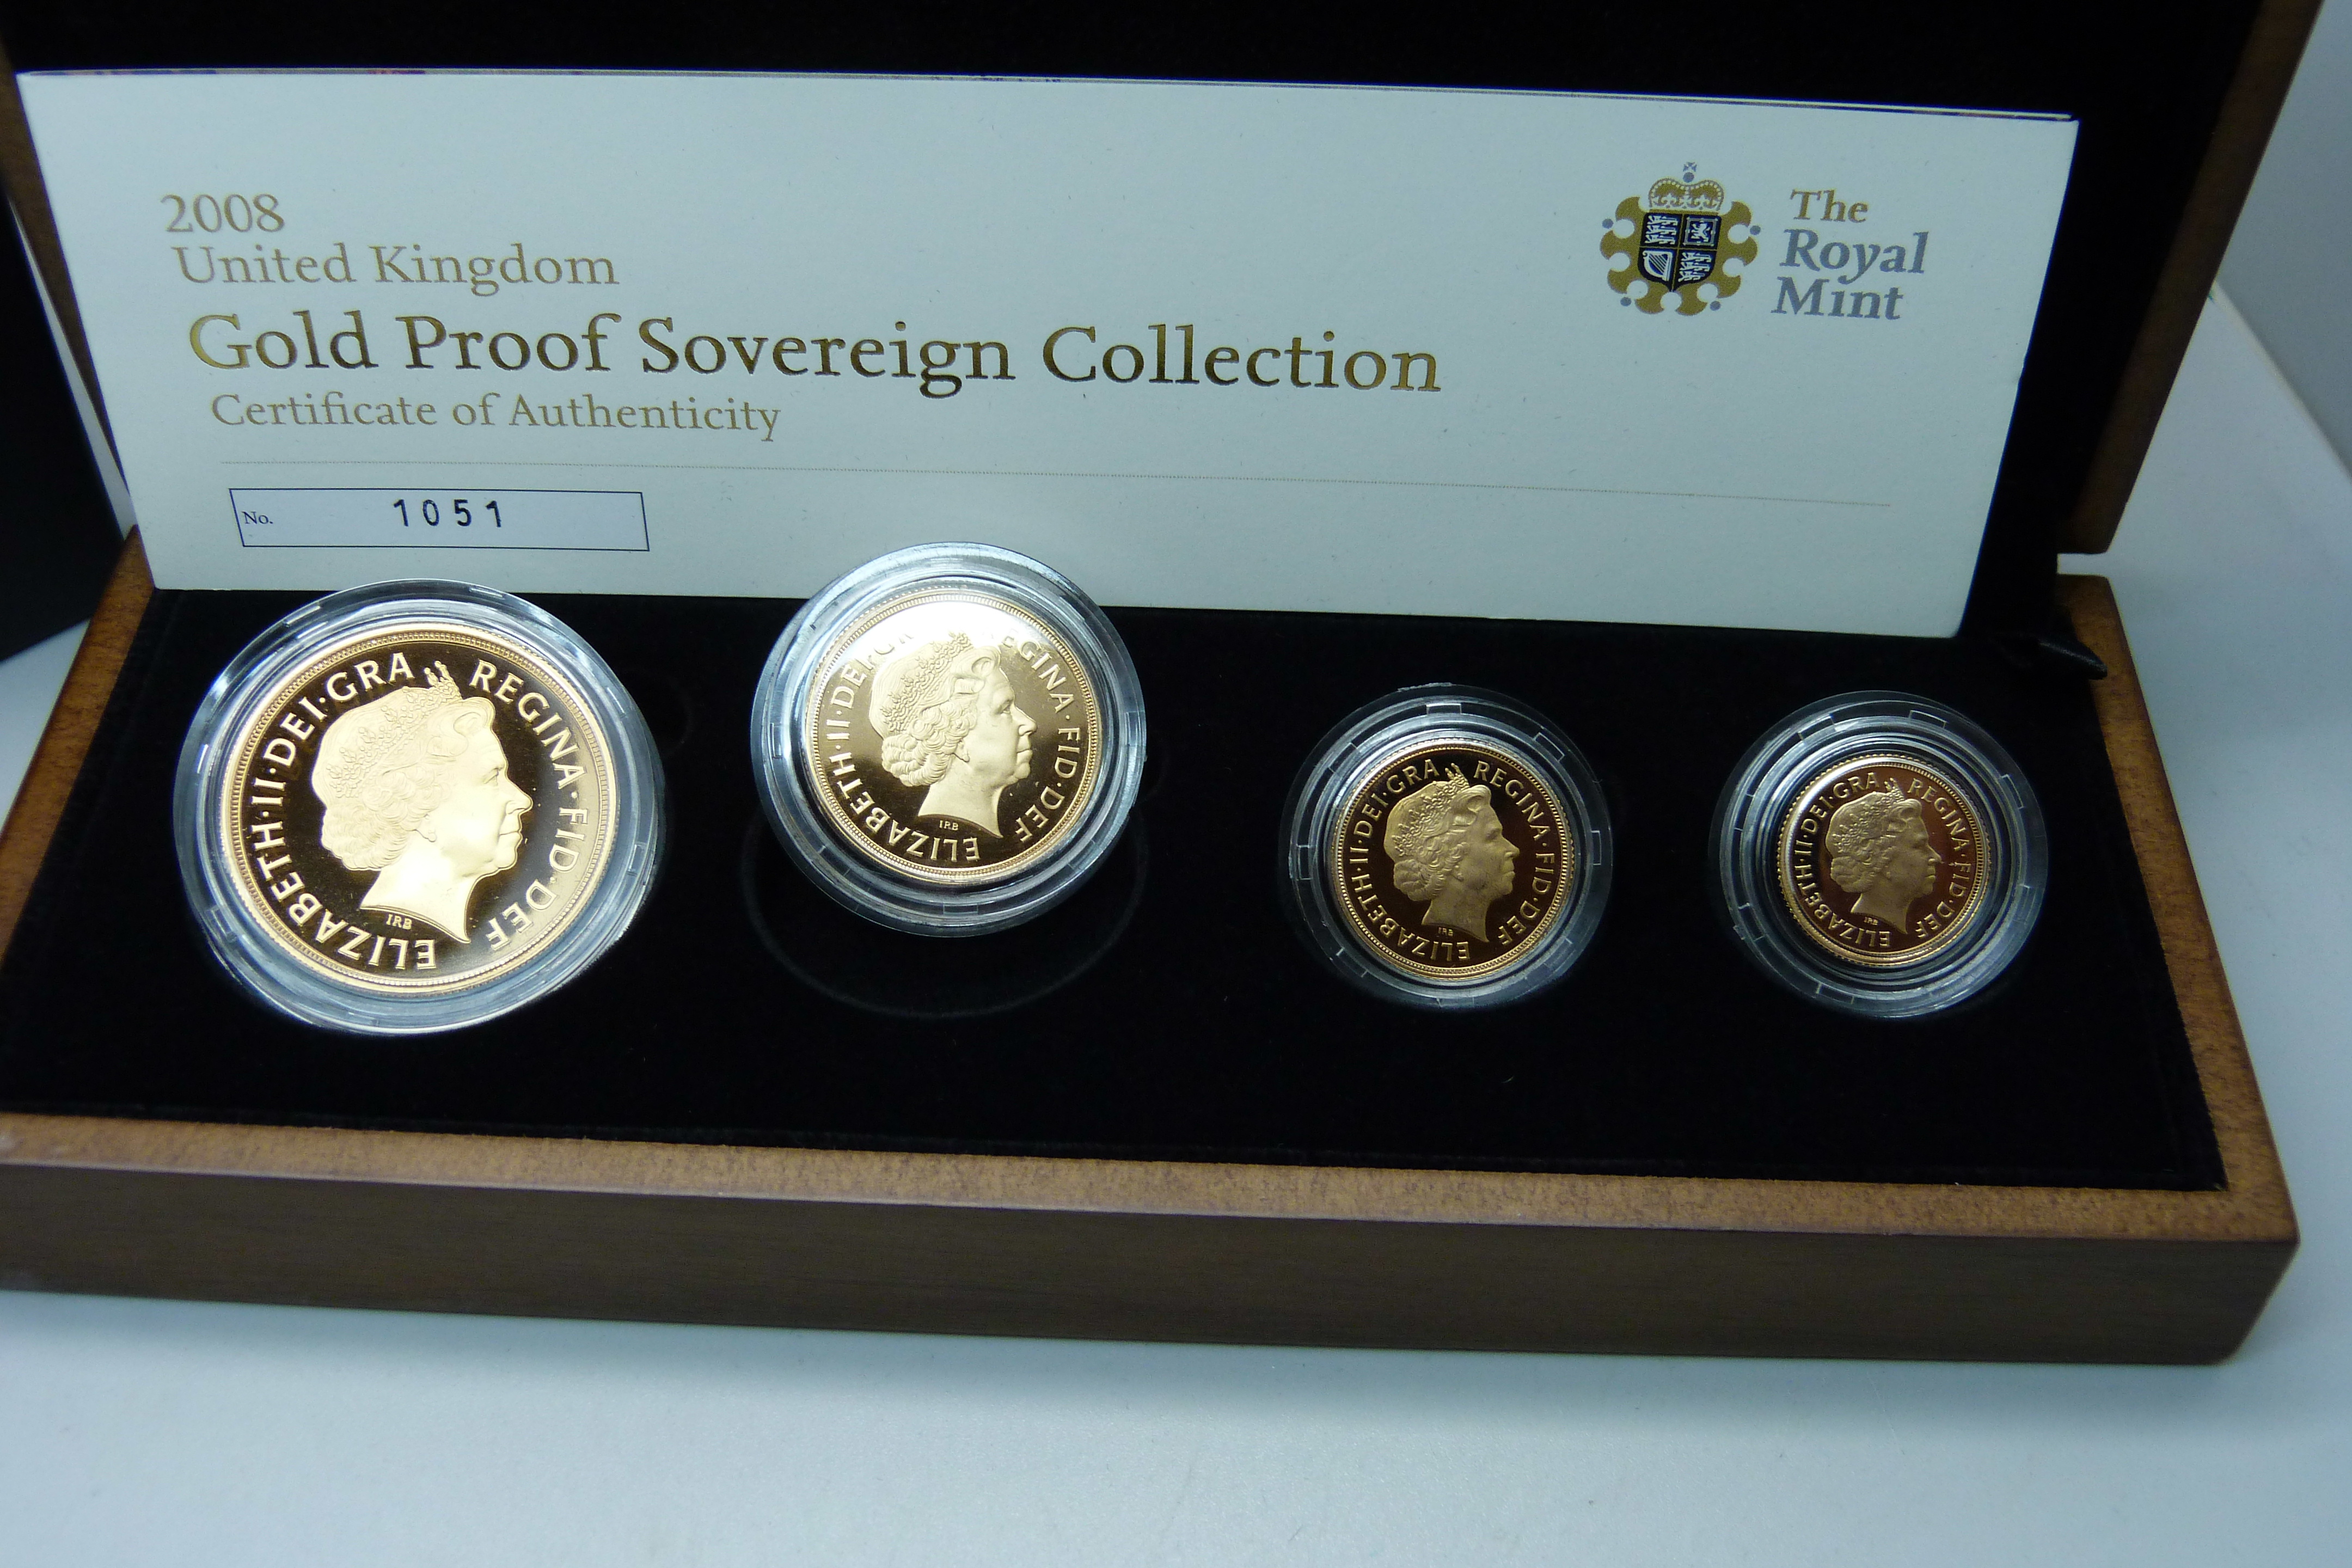 The Royal Mint 2008 UK gold proof sovereign collection, no. 1051 - Image 3 of 4